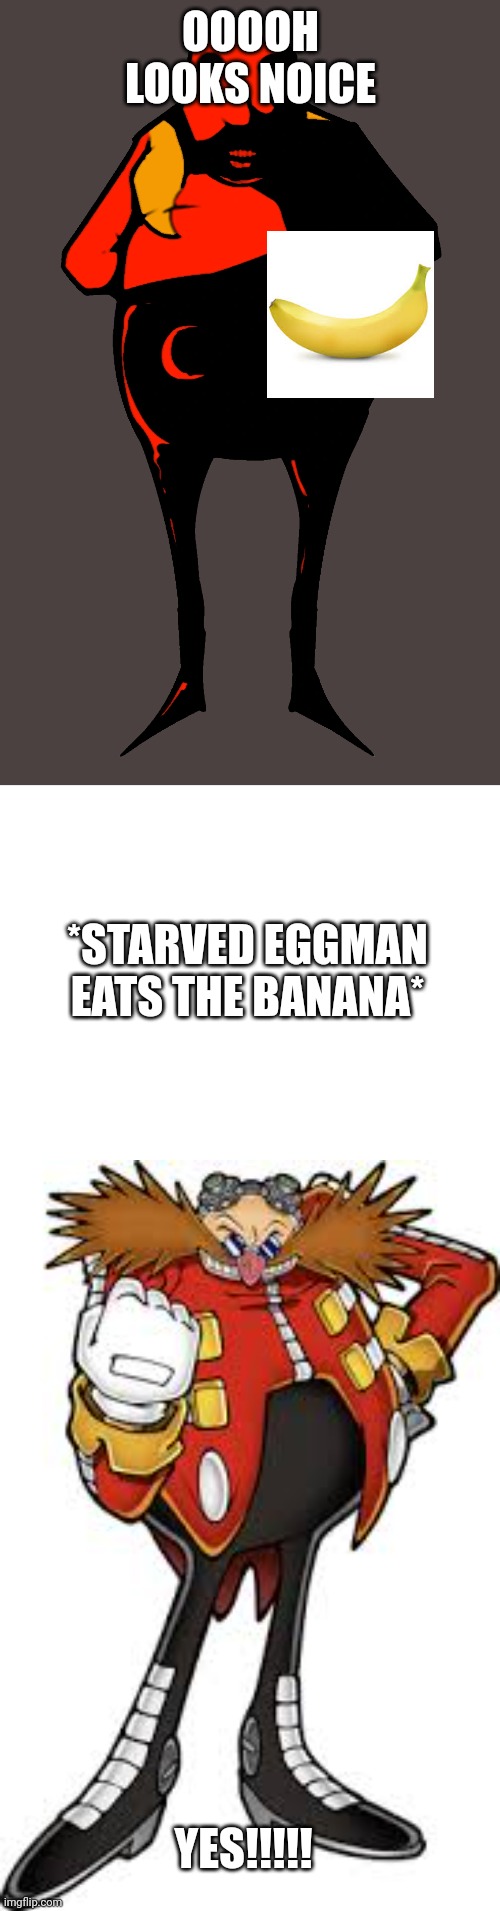 if eggman just consumed this delicious banana |  OOOOH LOOKS NOICE; *STARVED EGGMAN EATS THE BANANA*; YES!!!!! | image tagged in not actually a meme,not a meme,sonic the hedgehog,eggman,dr eggman,banana | made w/ Imgflip meme maker